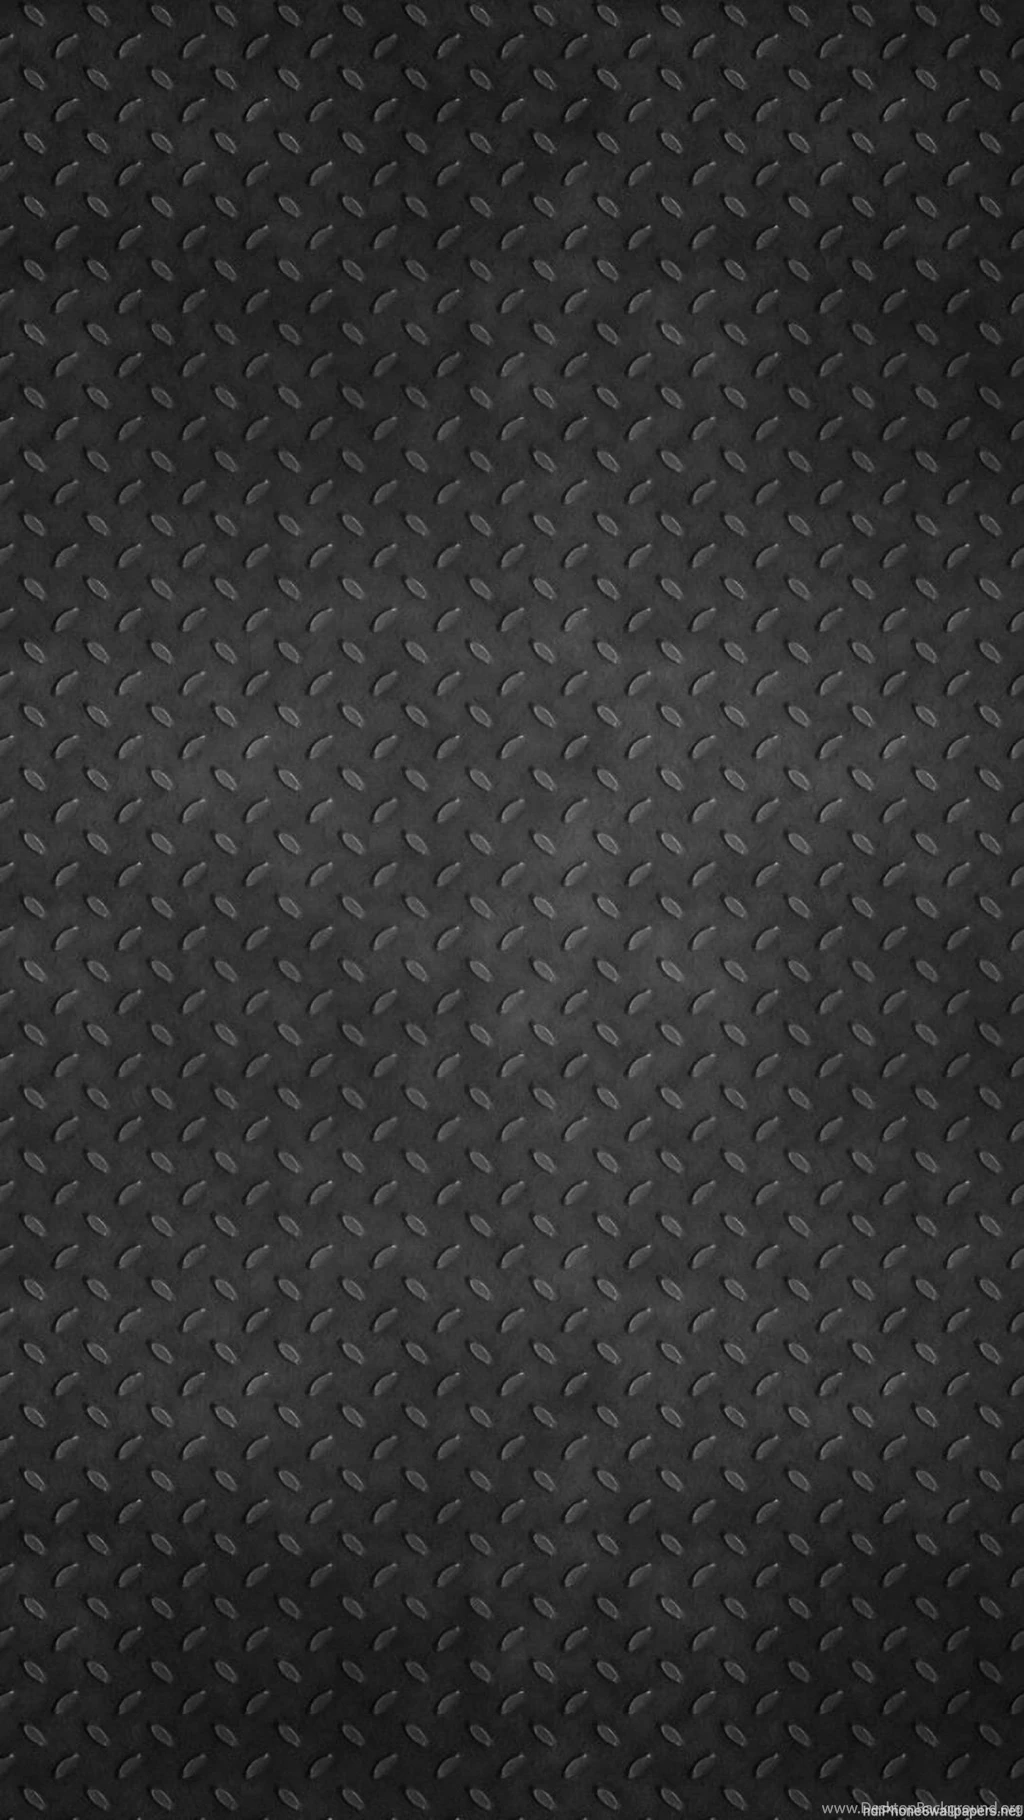 Metal Black Iphone 6 Wallpapers Hd And 1080p 6 Plus Wallpapers